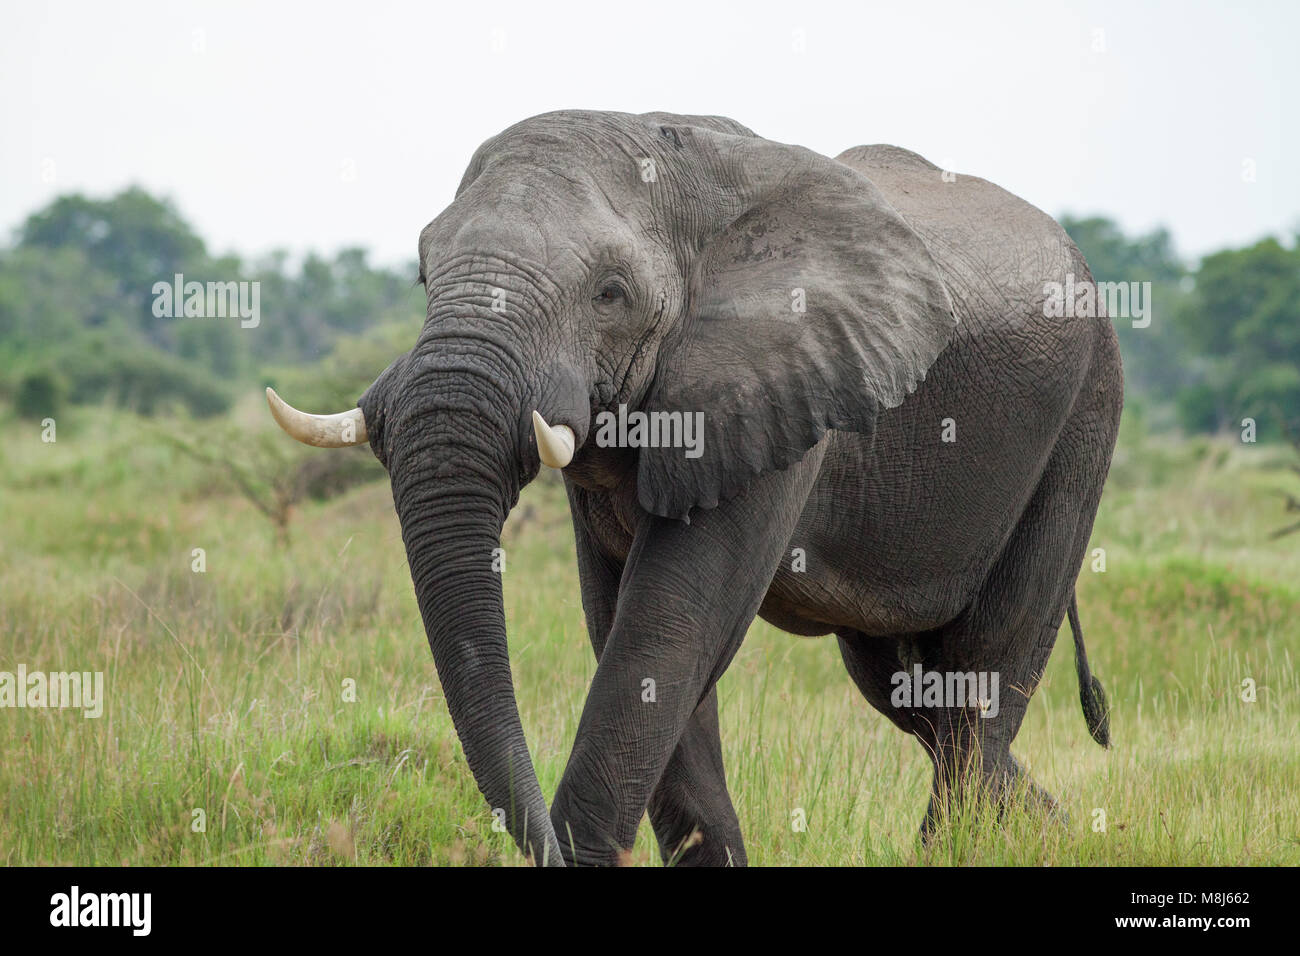 African Elephant Loxodonta africana. Though protected, still poached for ivory traders, A species of conservation concern. Well protected in Botswana. Stock Photo